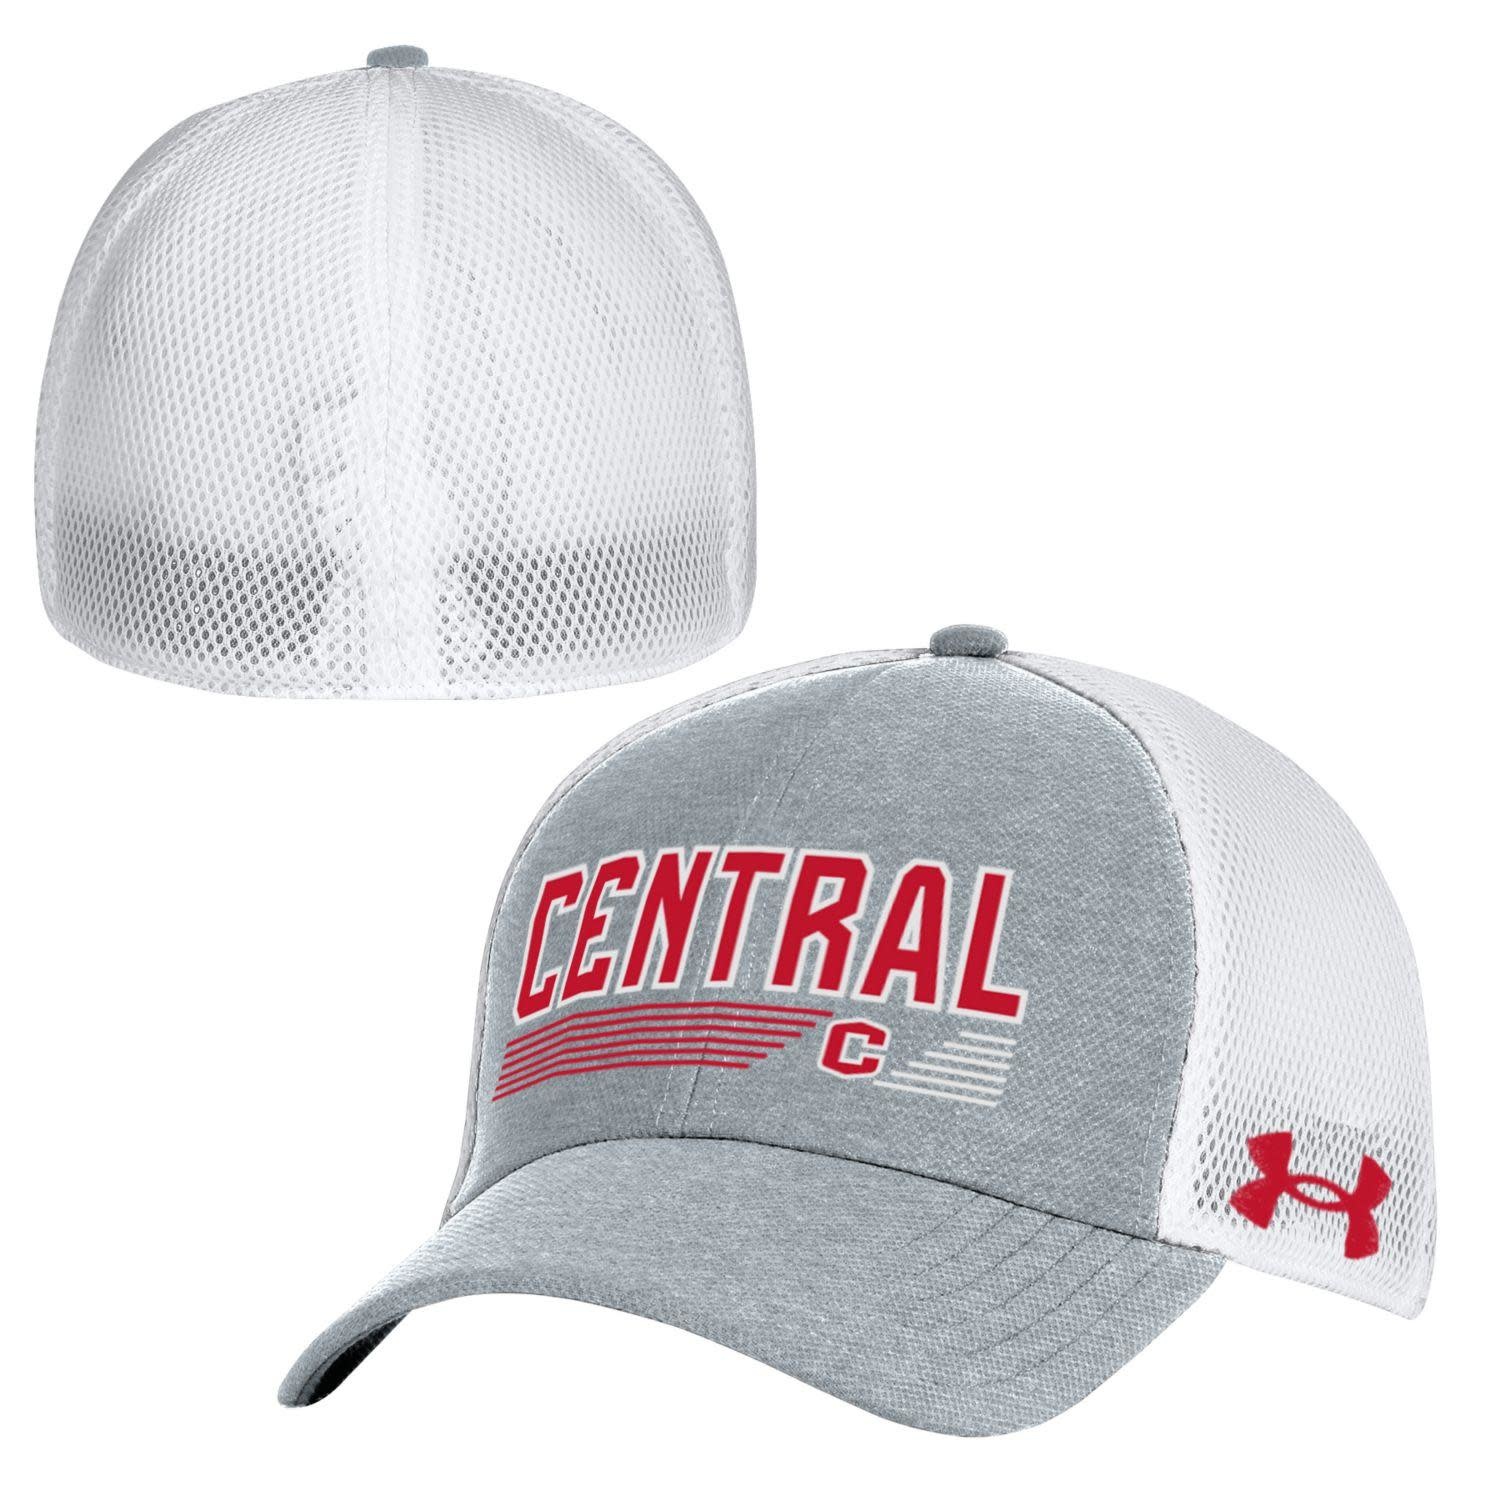 Under Armour UA Spacer Mesh Blitzing Hat Steel Heather - Central